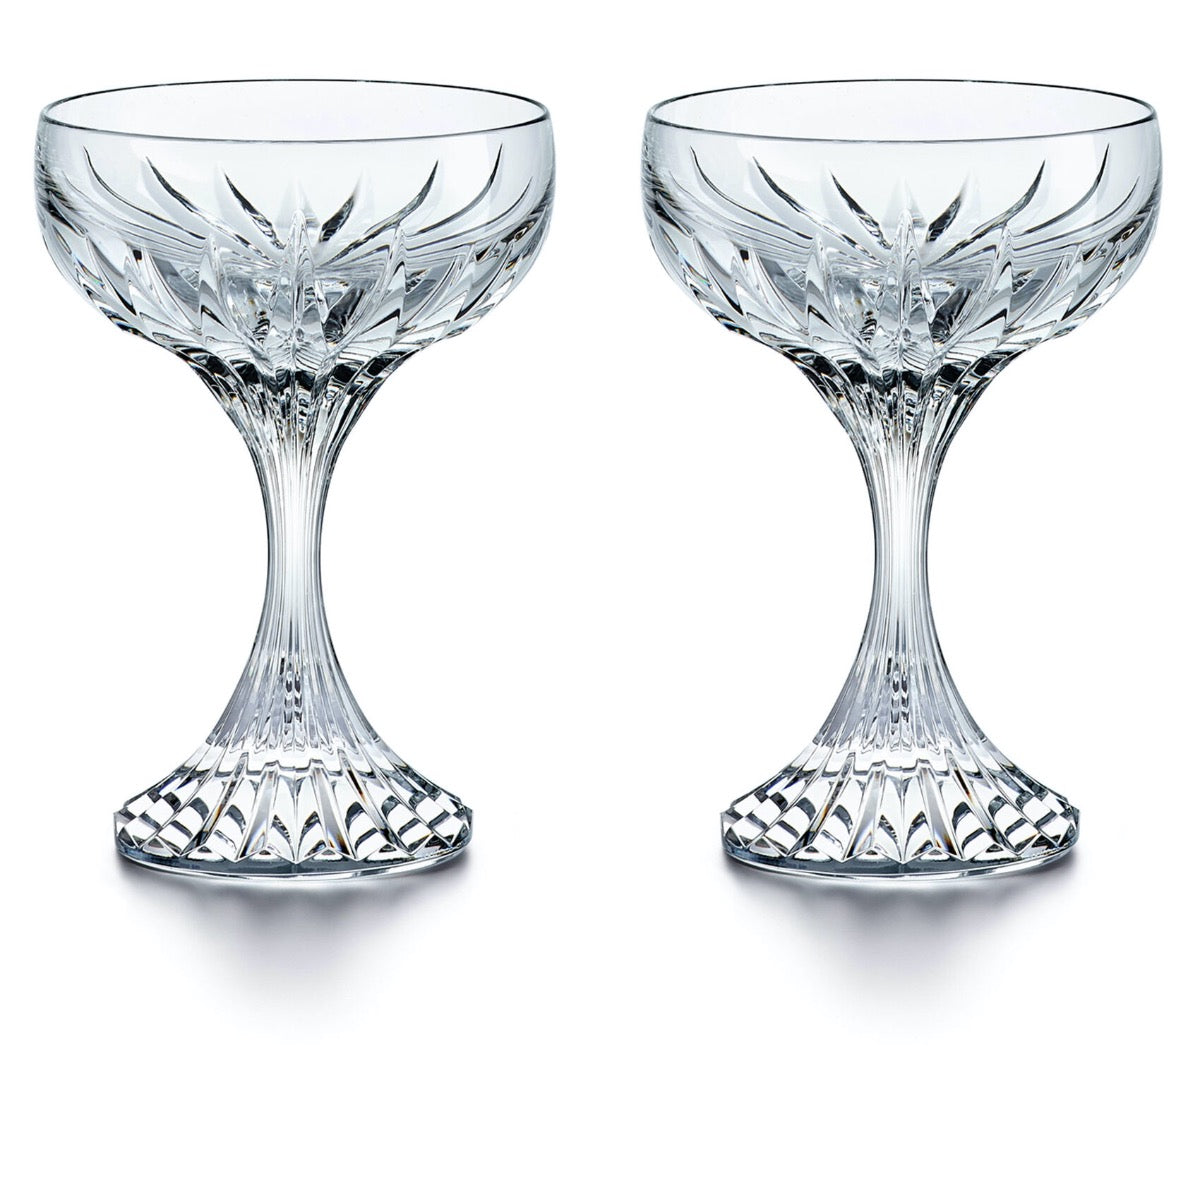 Pair of Coupe Glasses